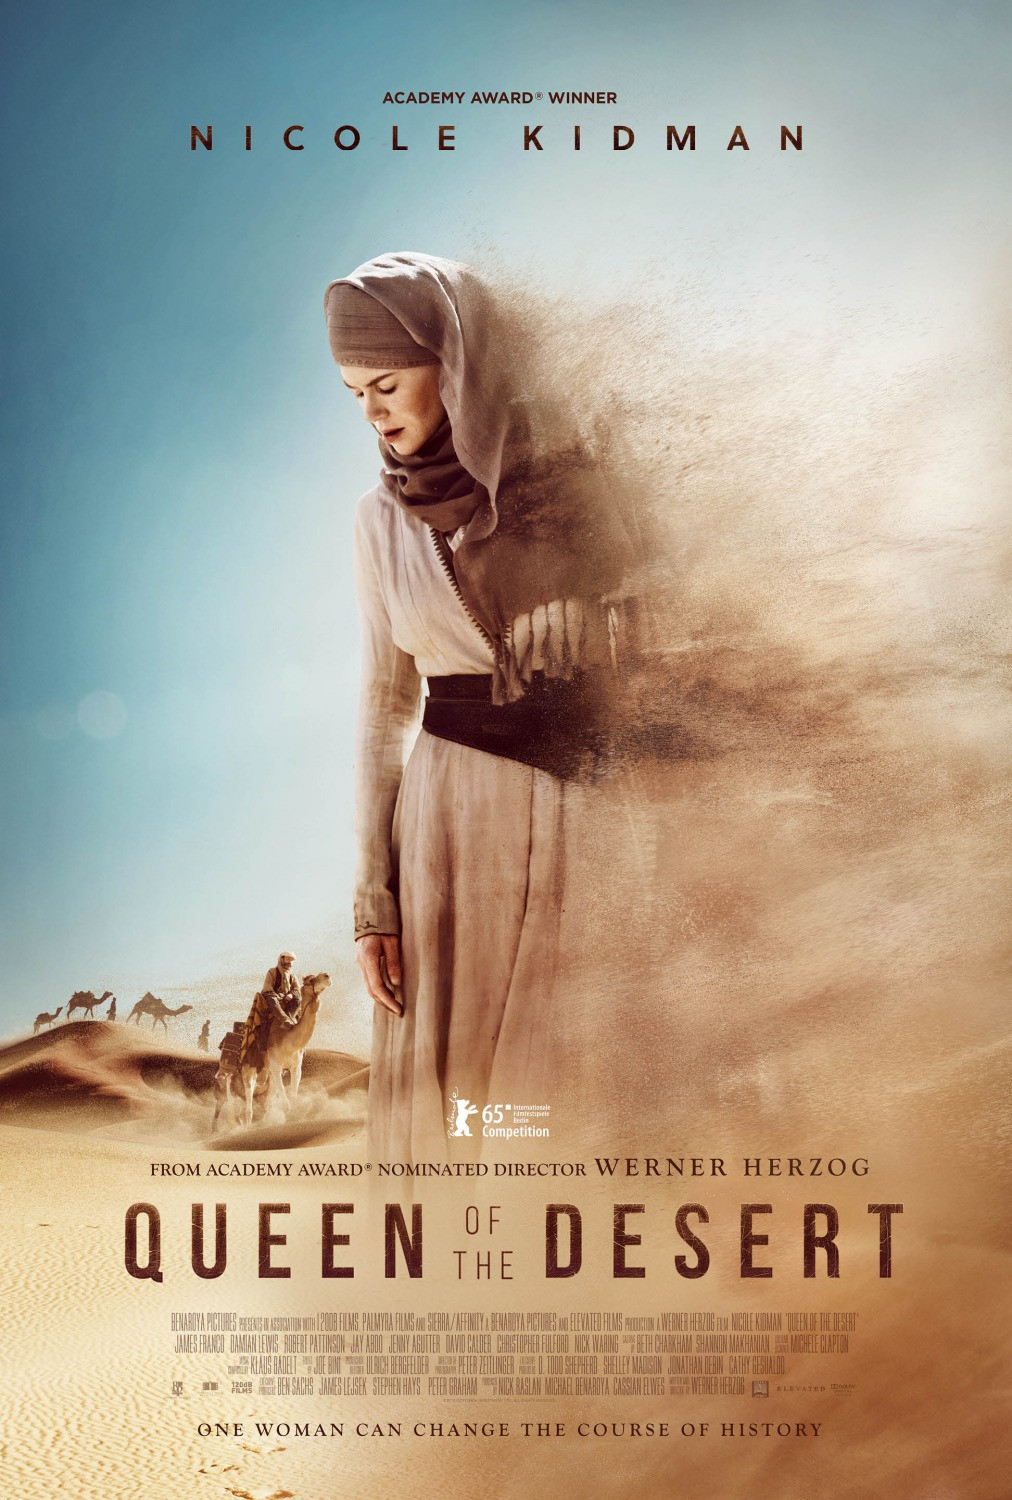 Queen Of the Dessert Lovely Queen Of the Desert Trailers Clips and Posters